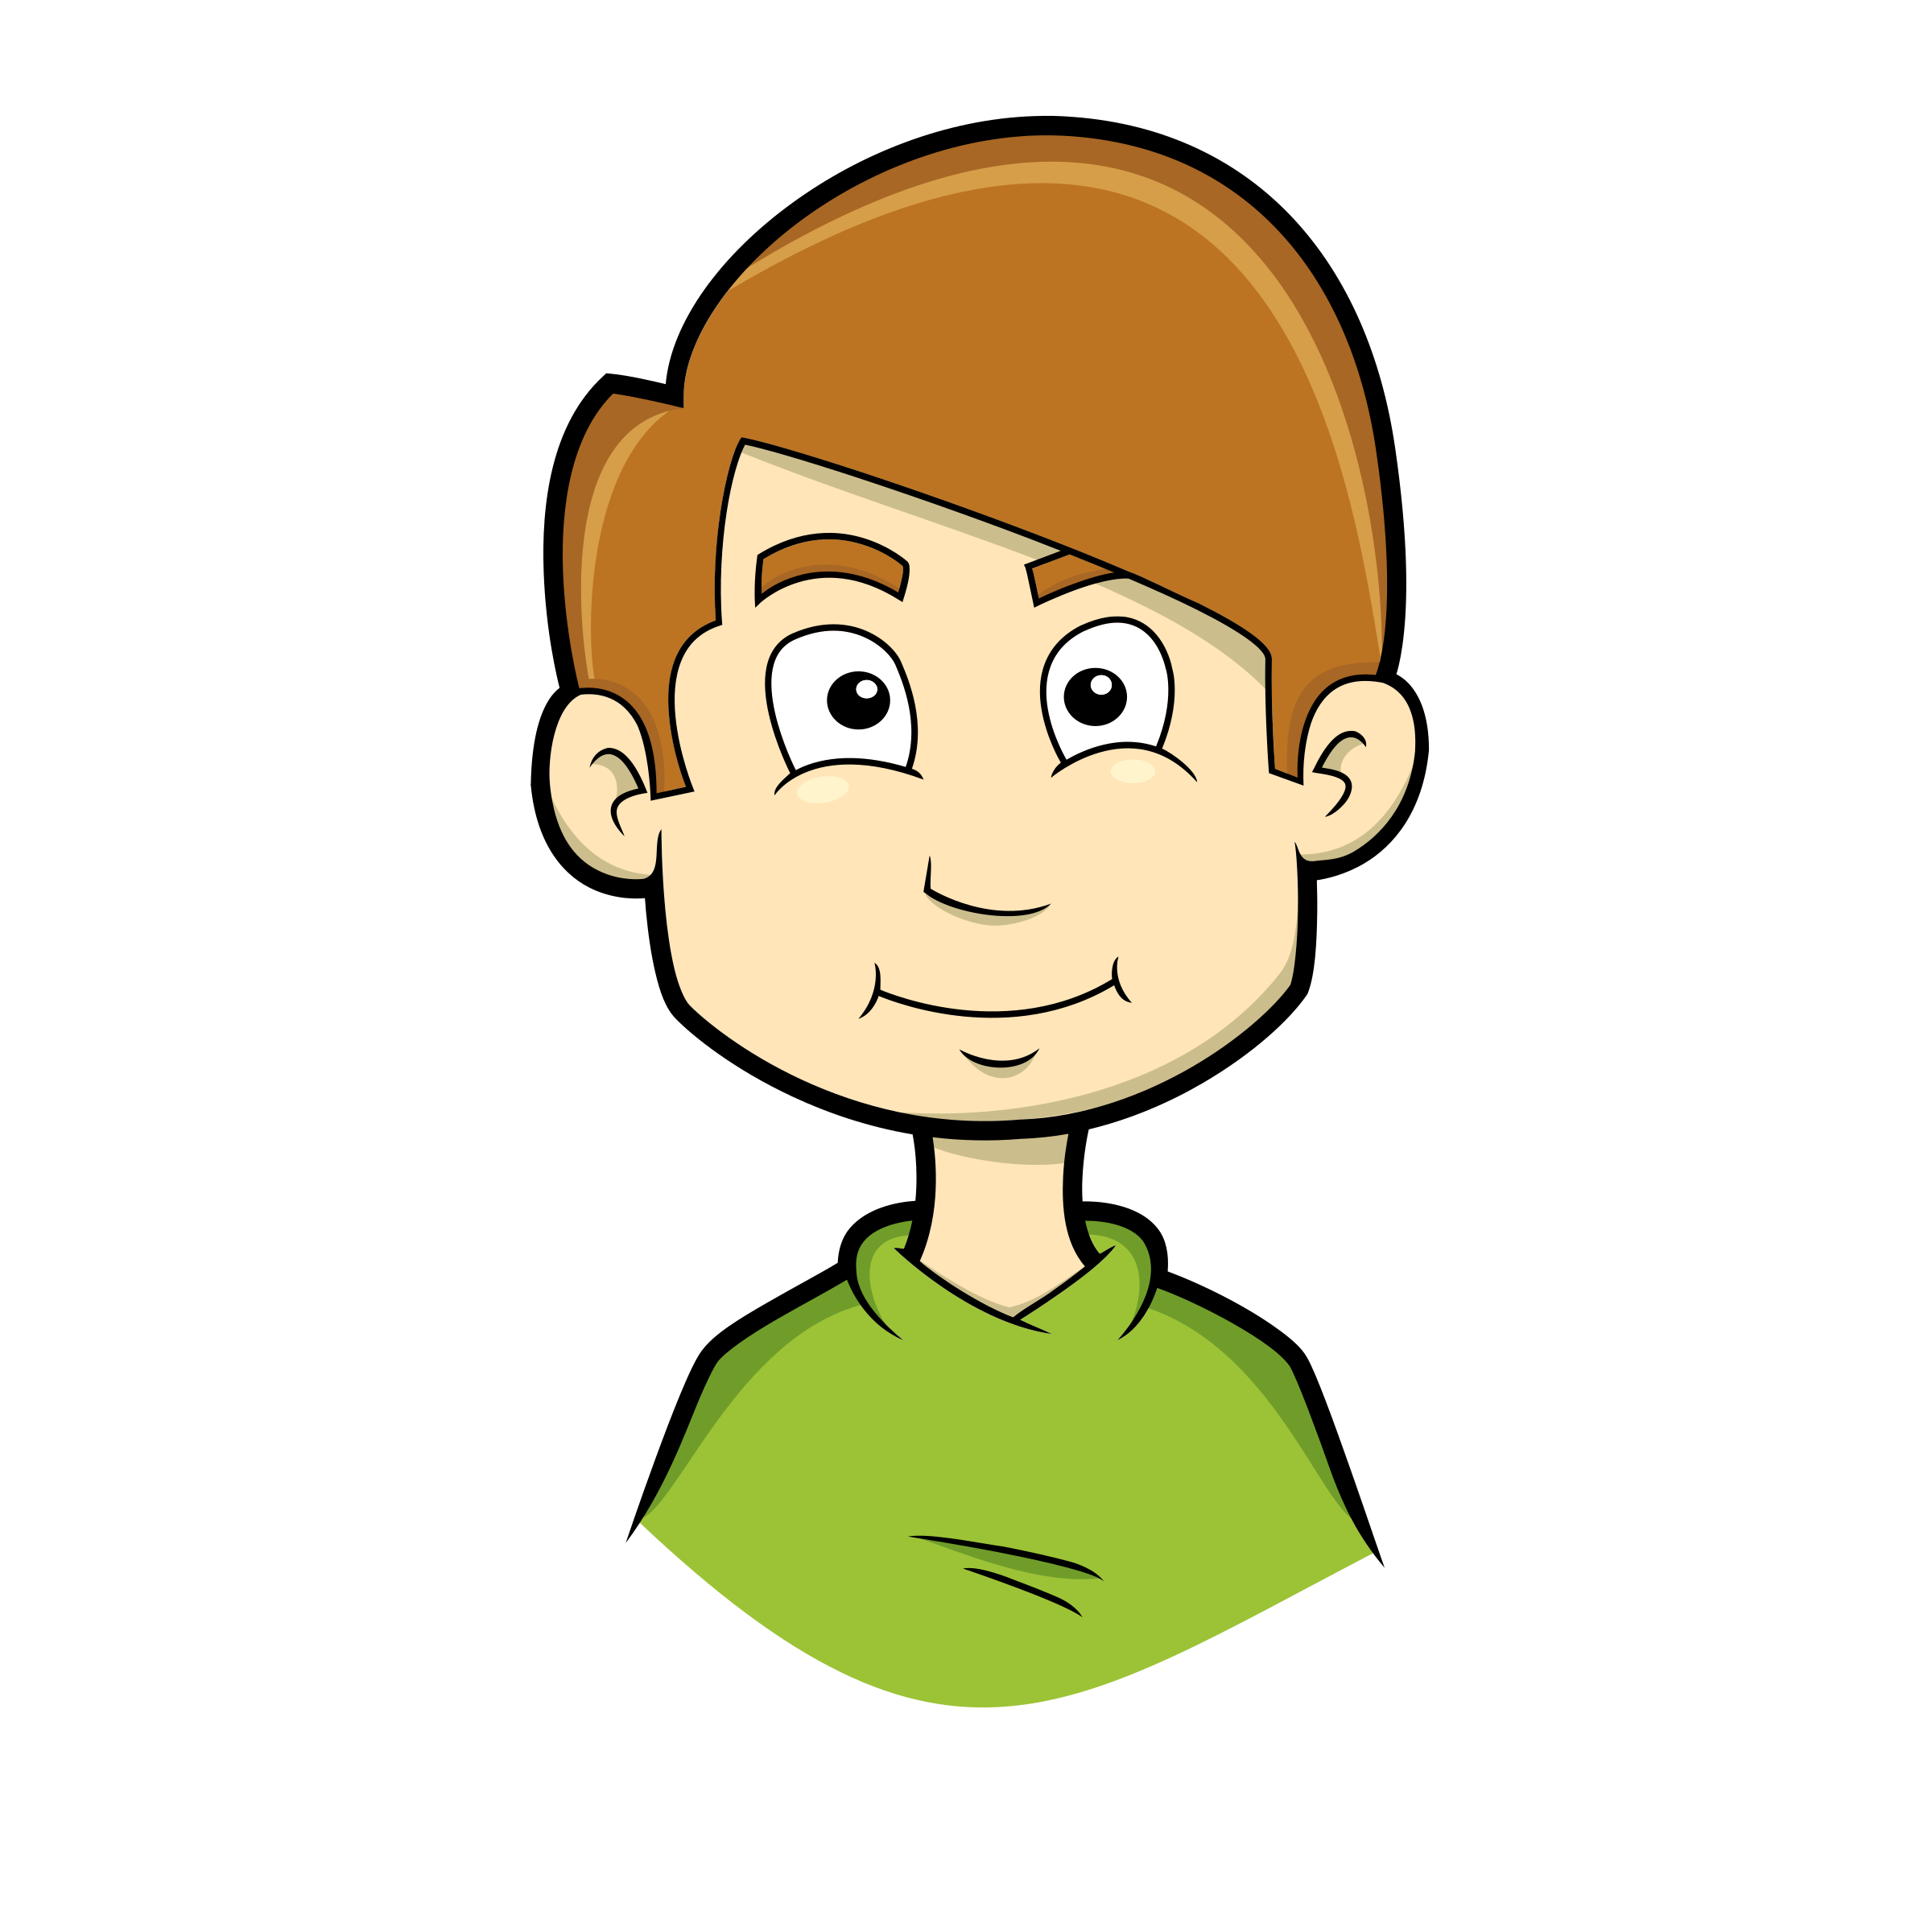 Smiling face of a. Kids clipart human eye